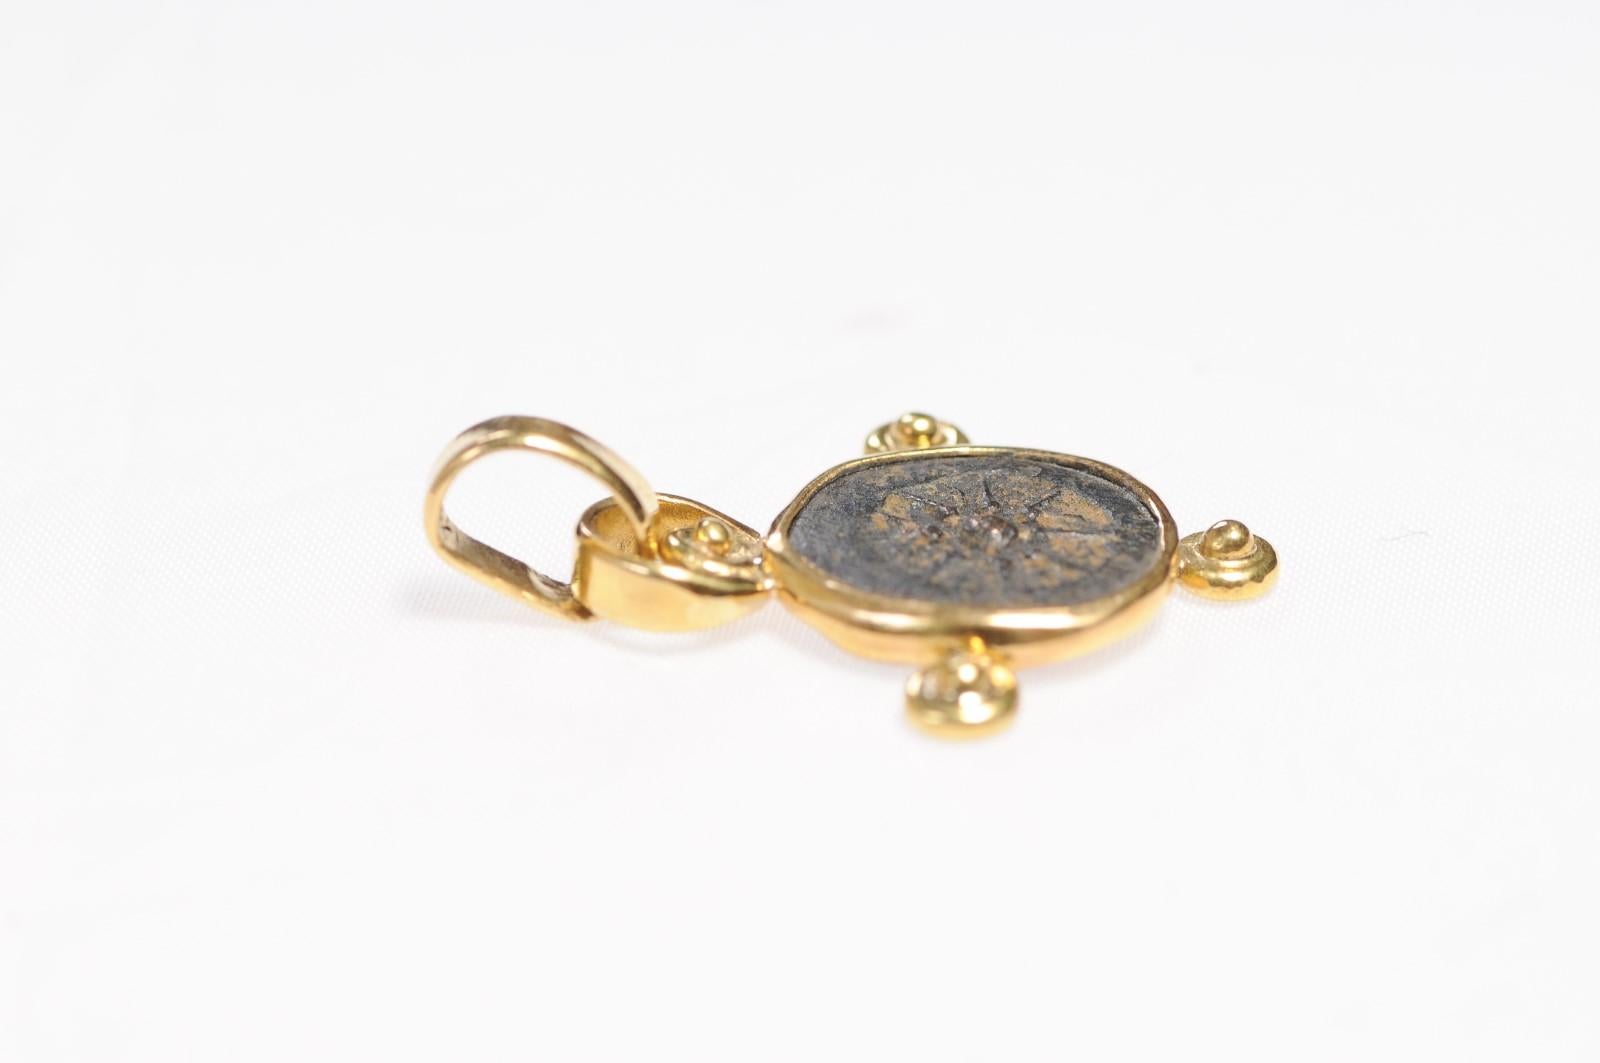 Roman Widow's Mite Coin, 22kt Gold Pendant (pendant only) For Sale 2